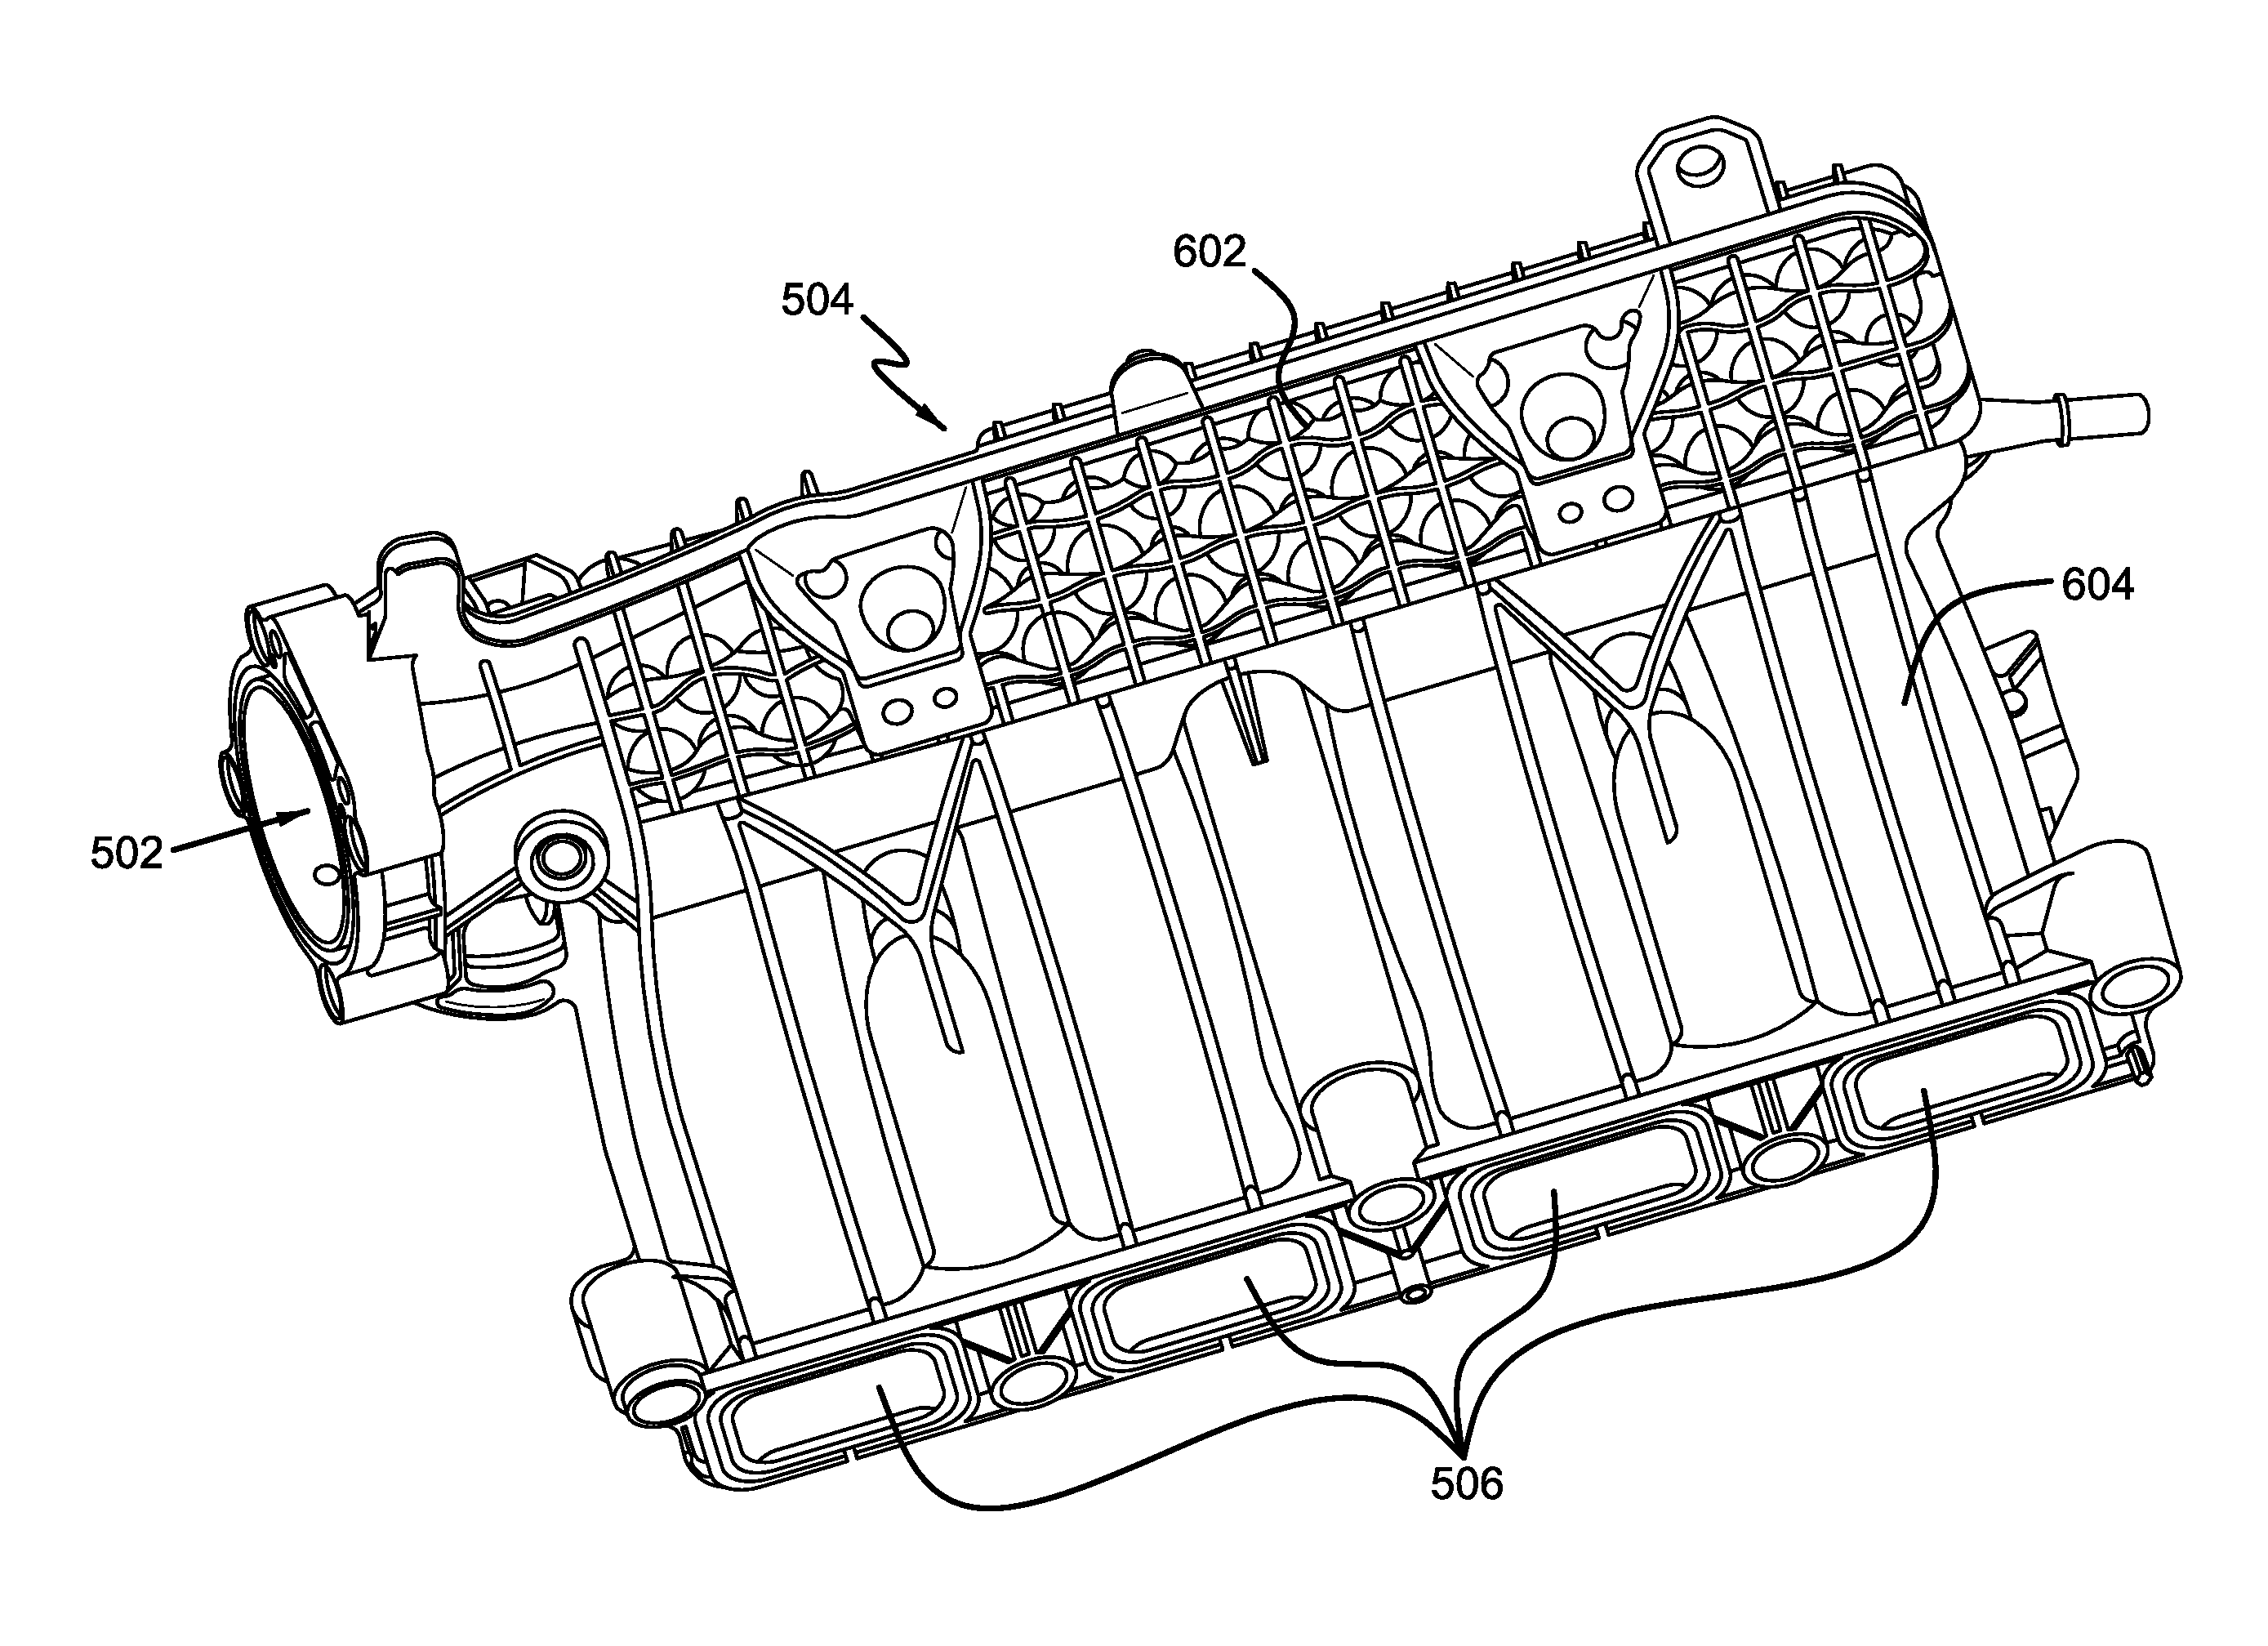 Structure to reduce noise and vibration in an engine system